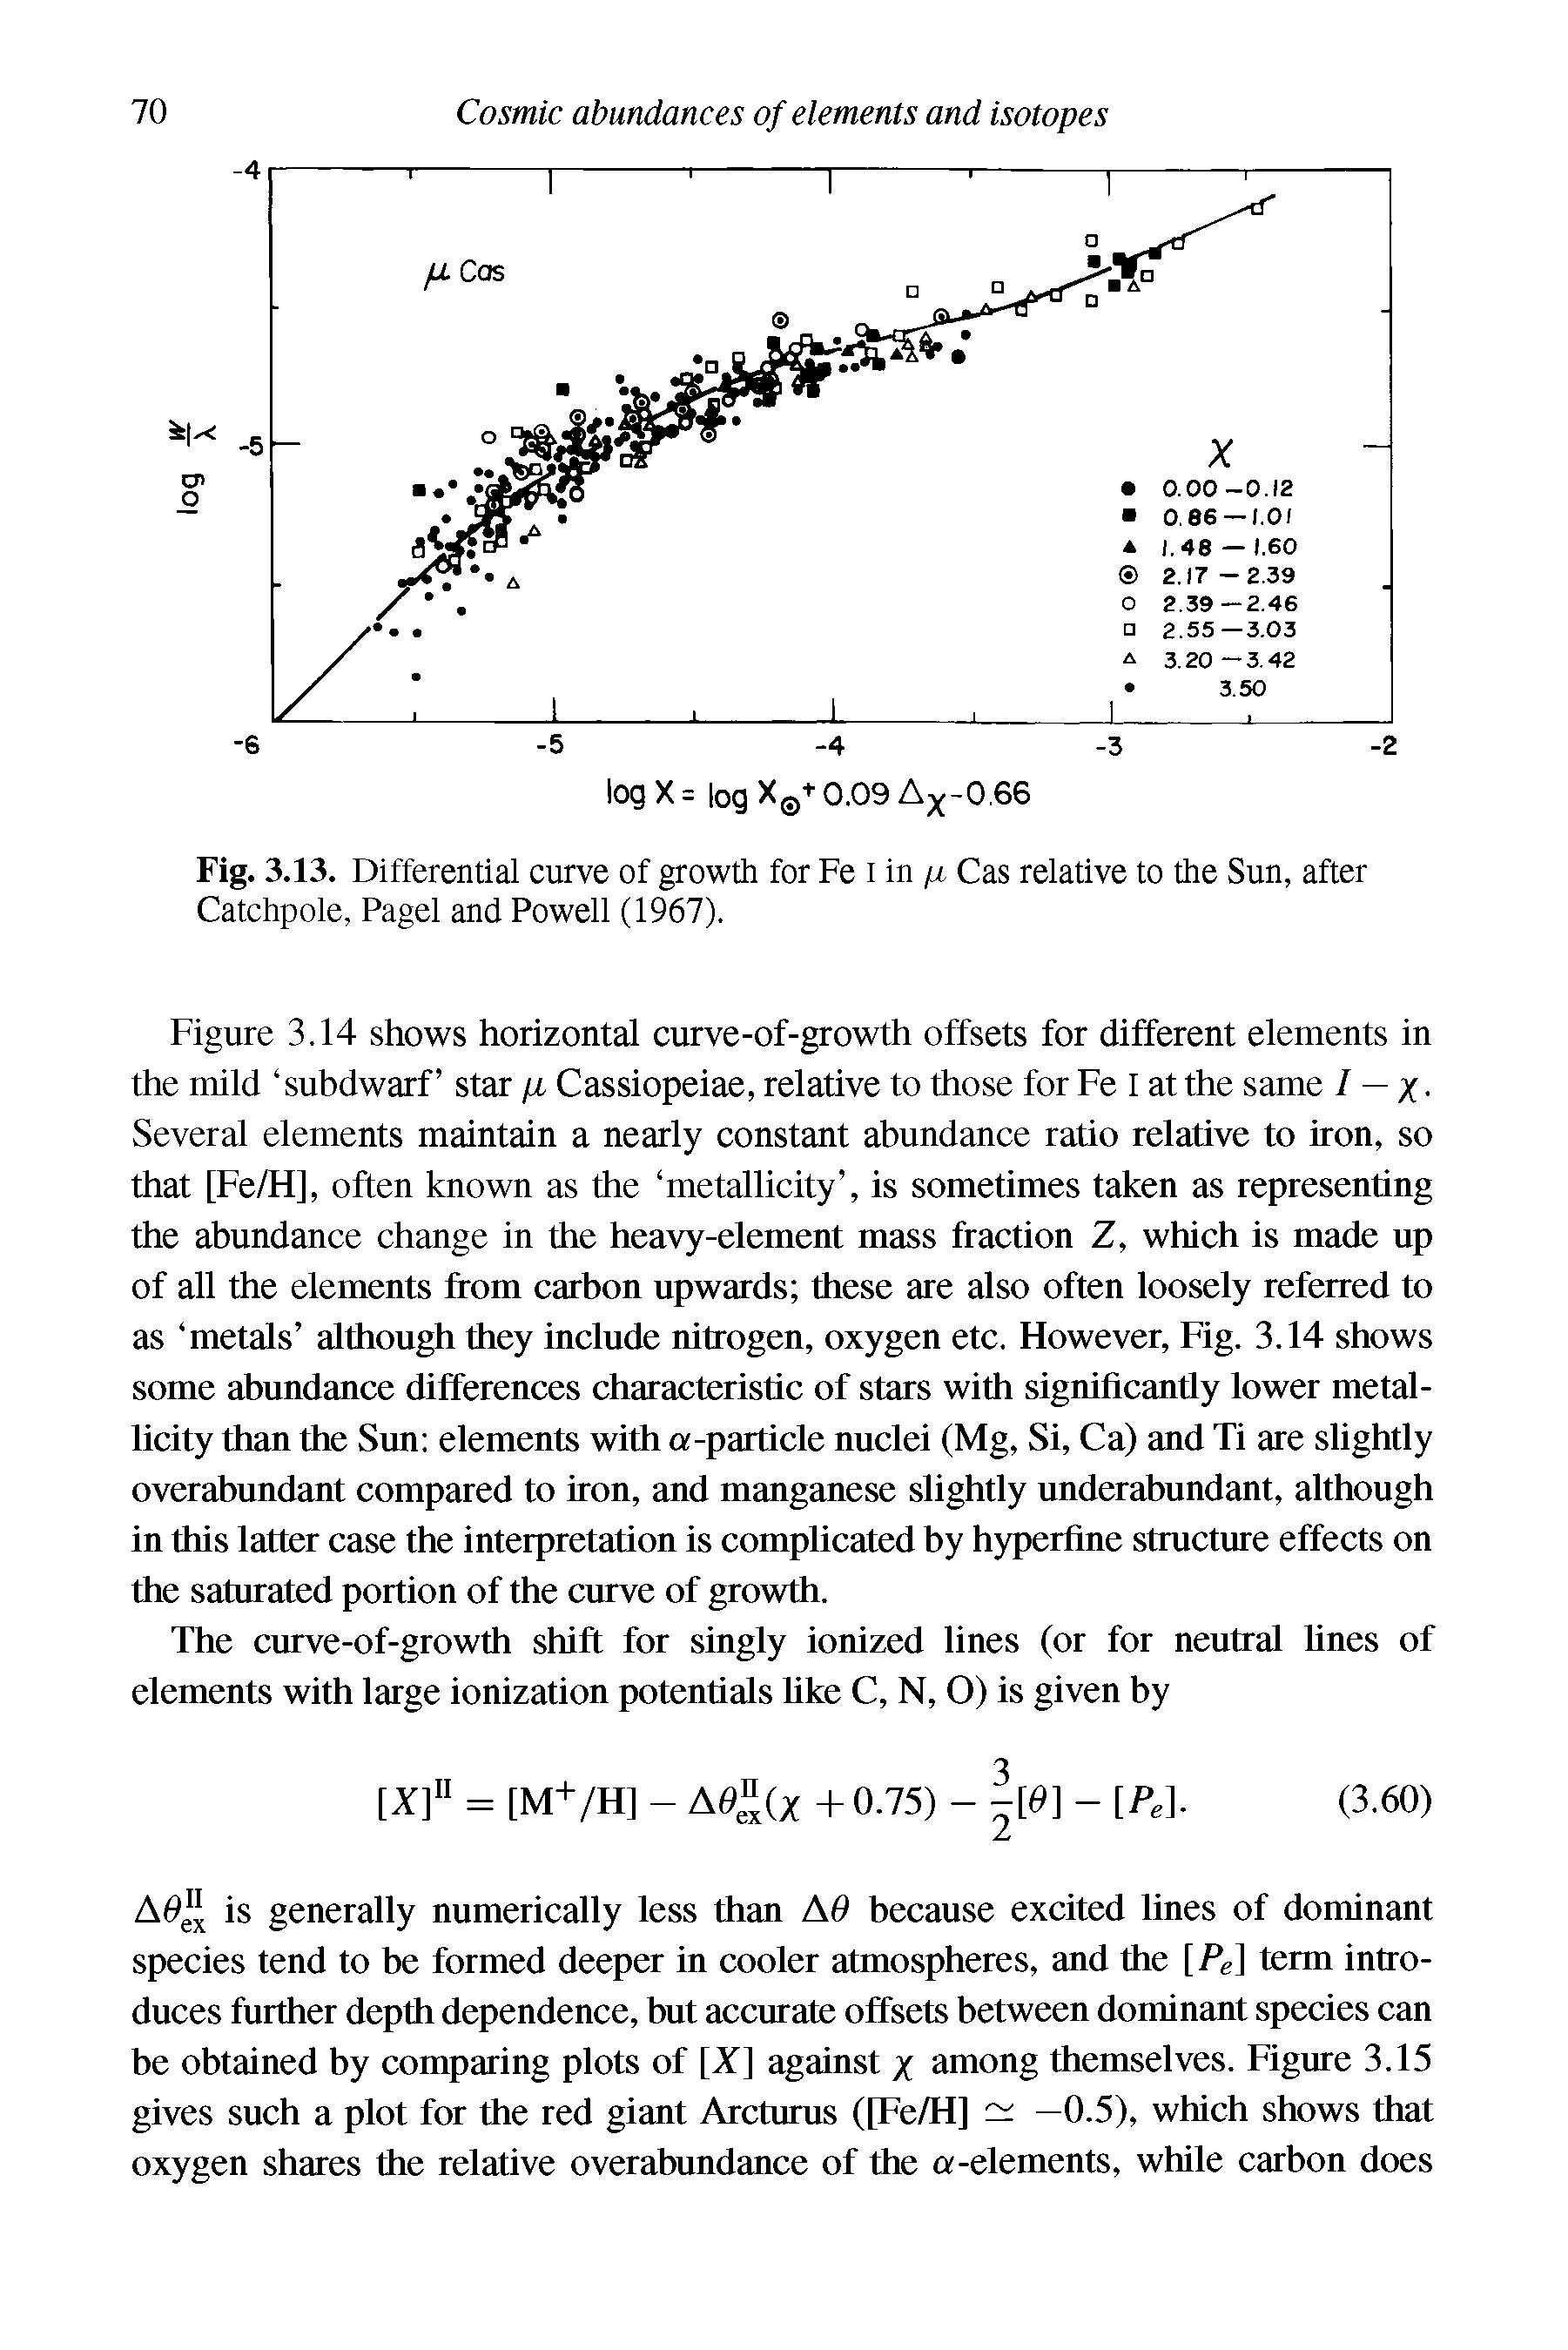 Fig. 3.13. Differential curve of growth for Fe i in p, Cas relative to the Sun, after Catchpole, Pagel and Powell (1967).